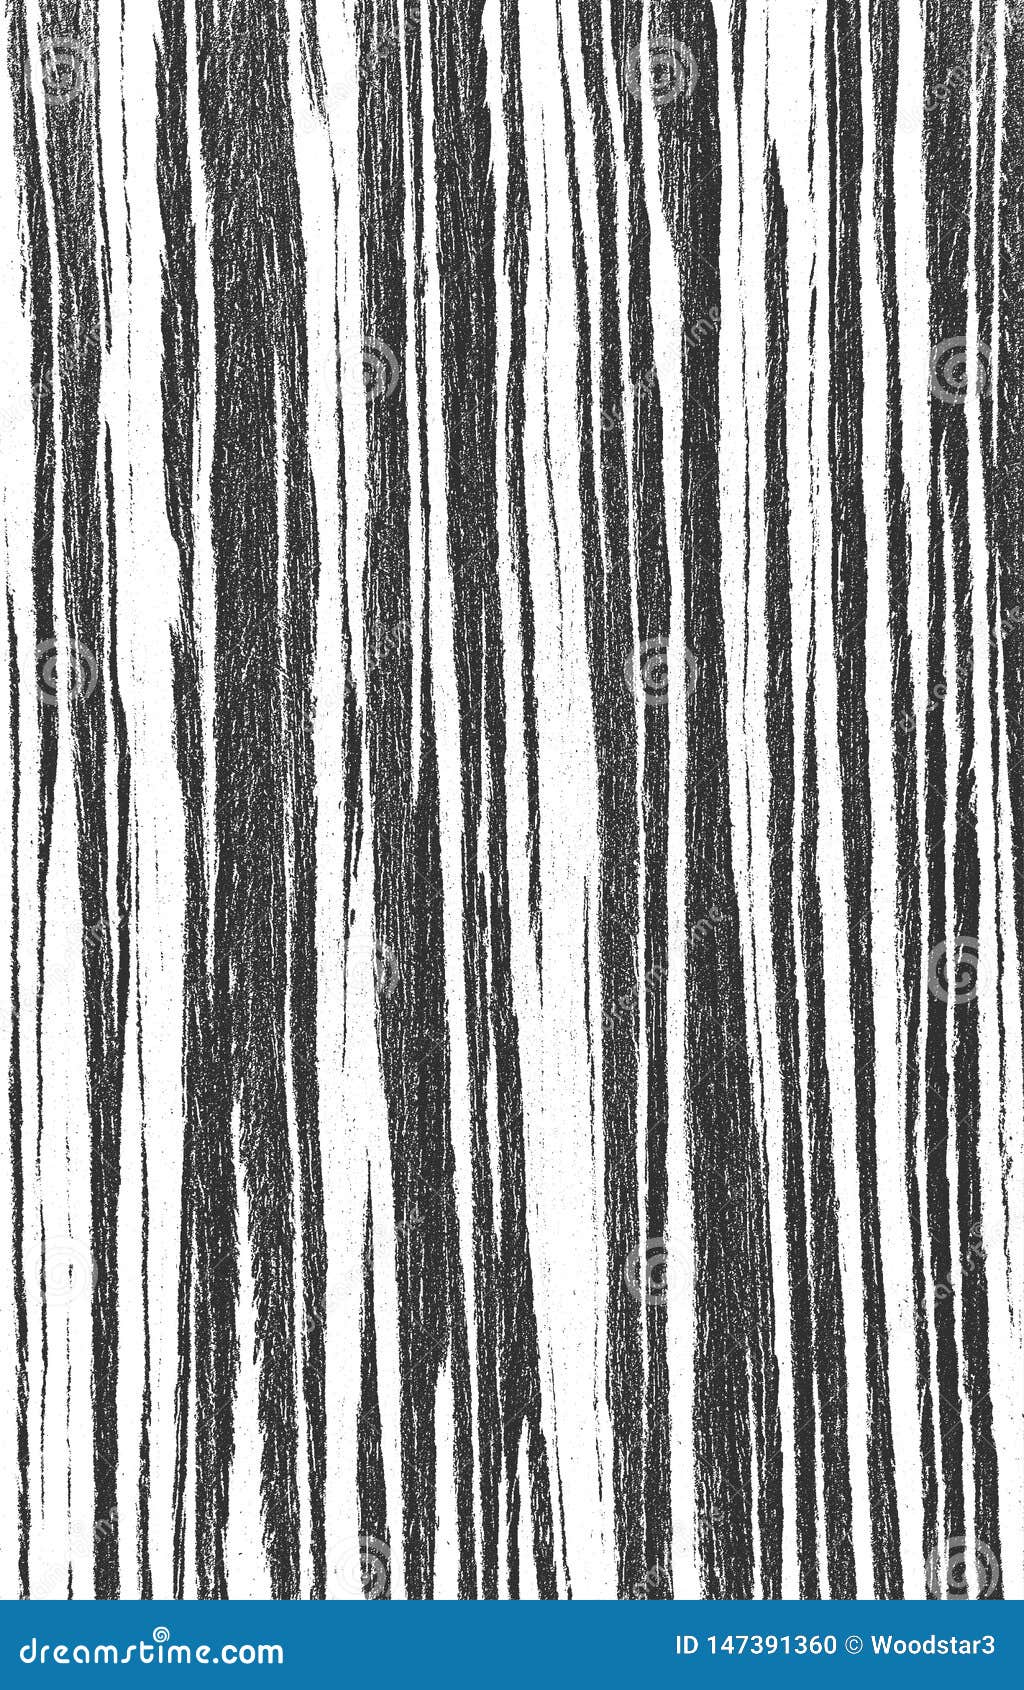 Wood Textures Black White Stripes Background Eps8 Vector Wood